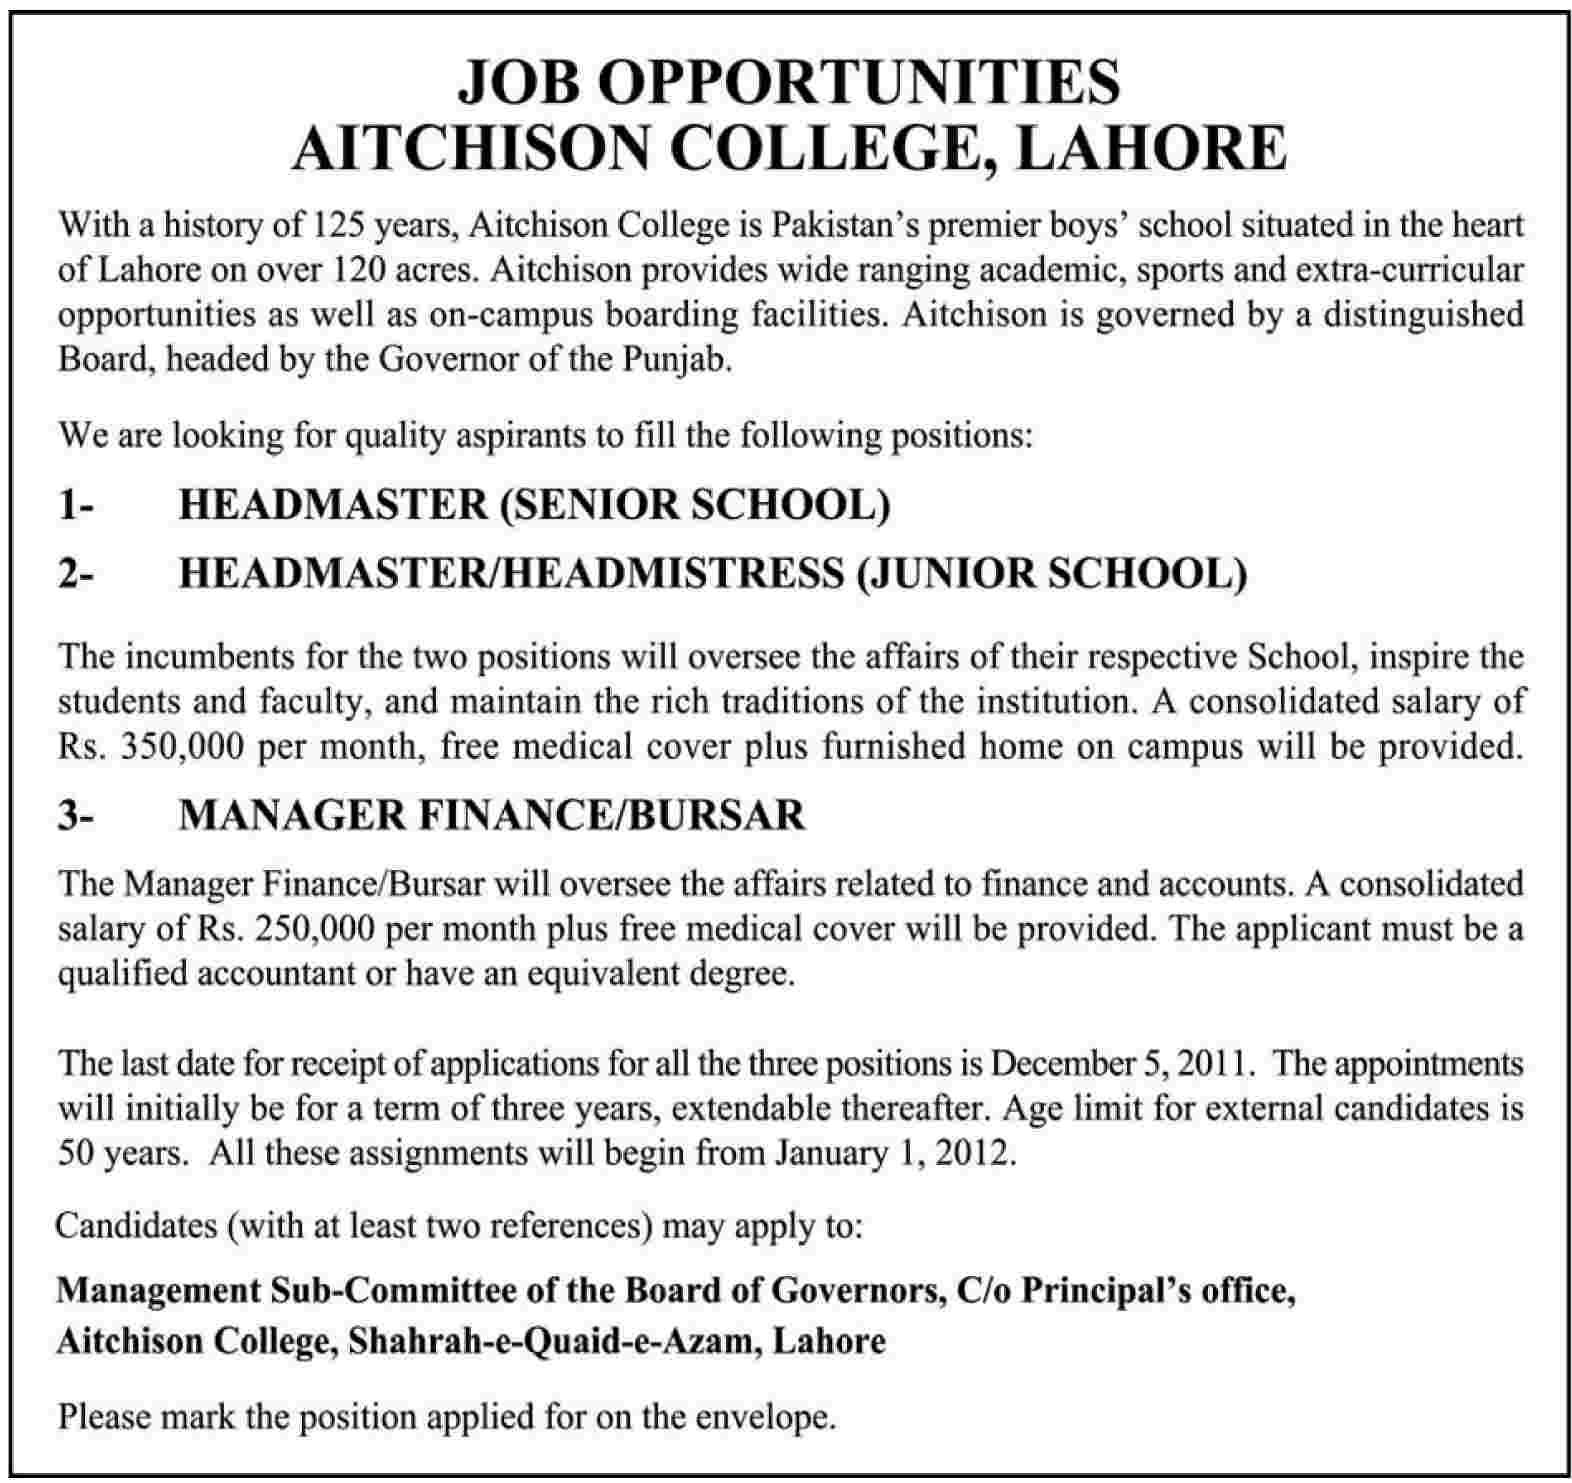 AITCHISON College Lahore Jobs Opportunity